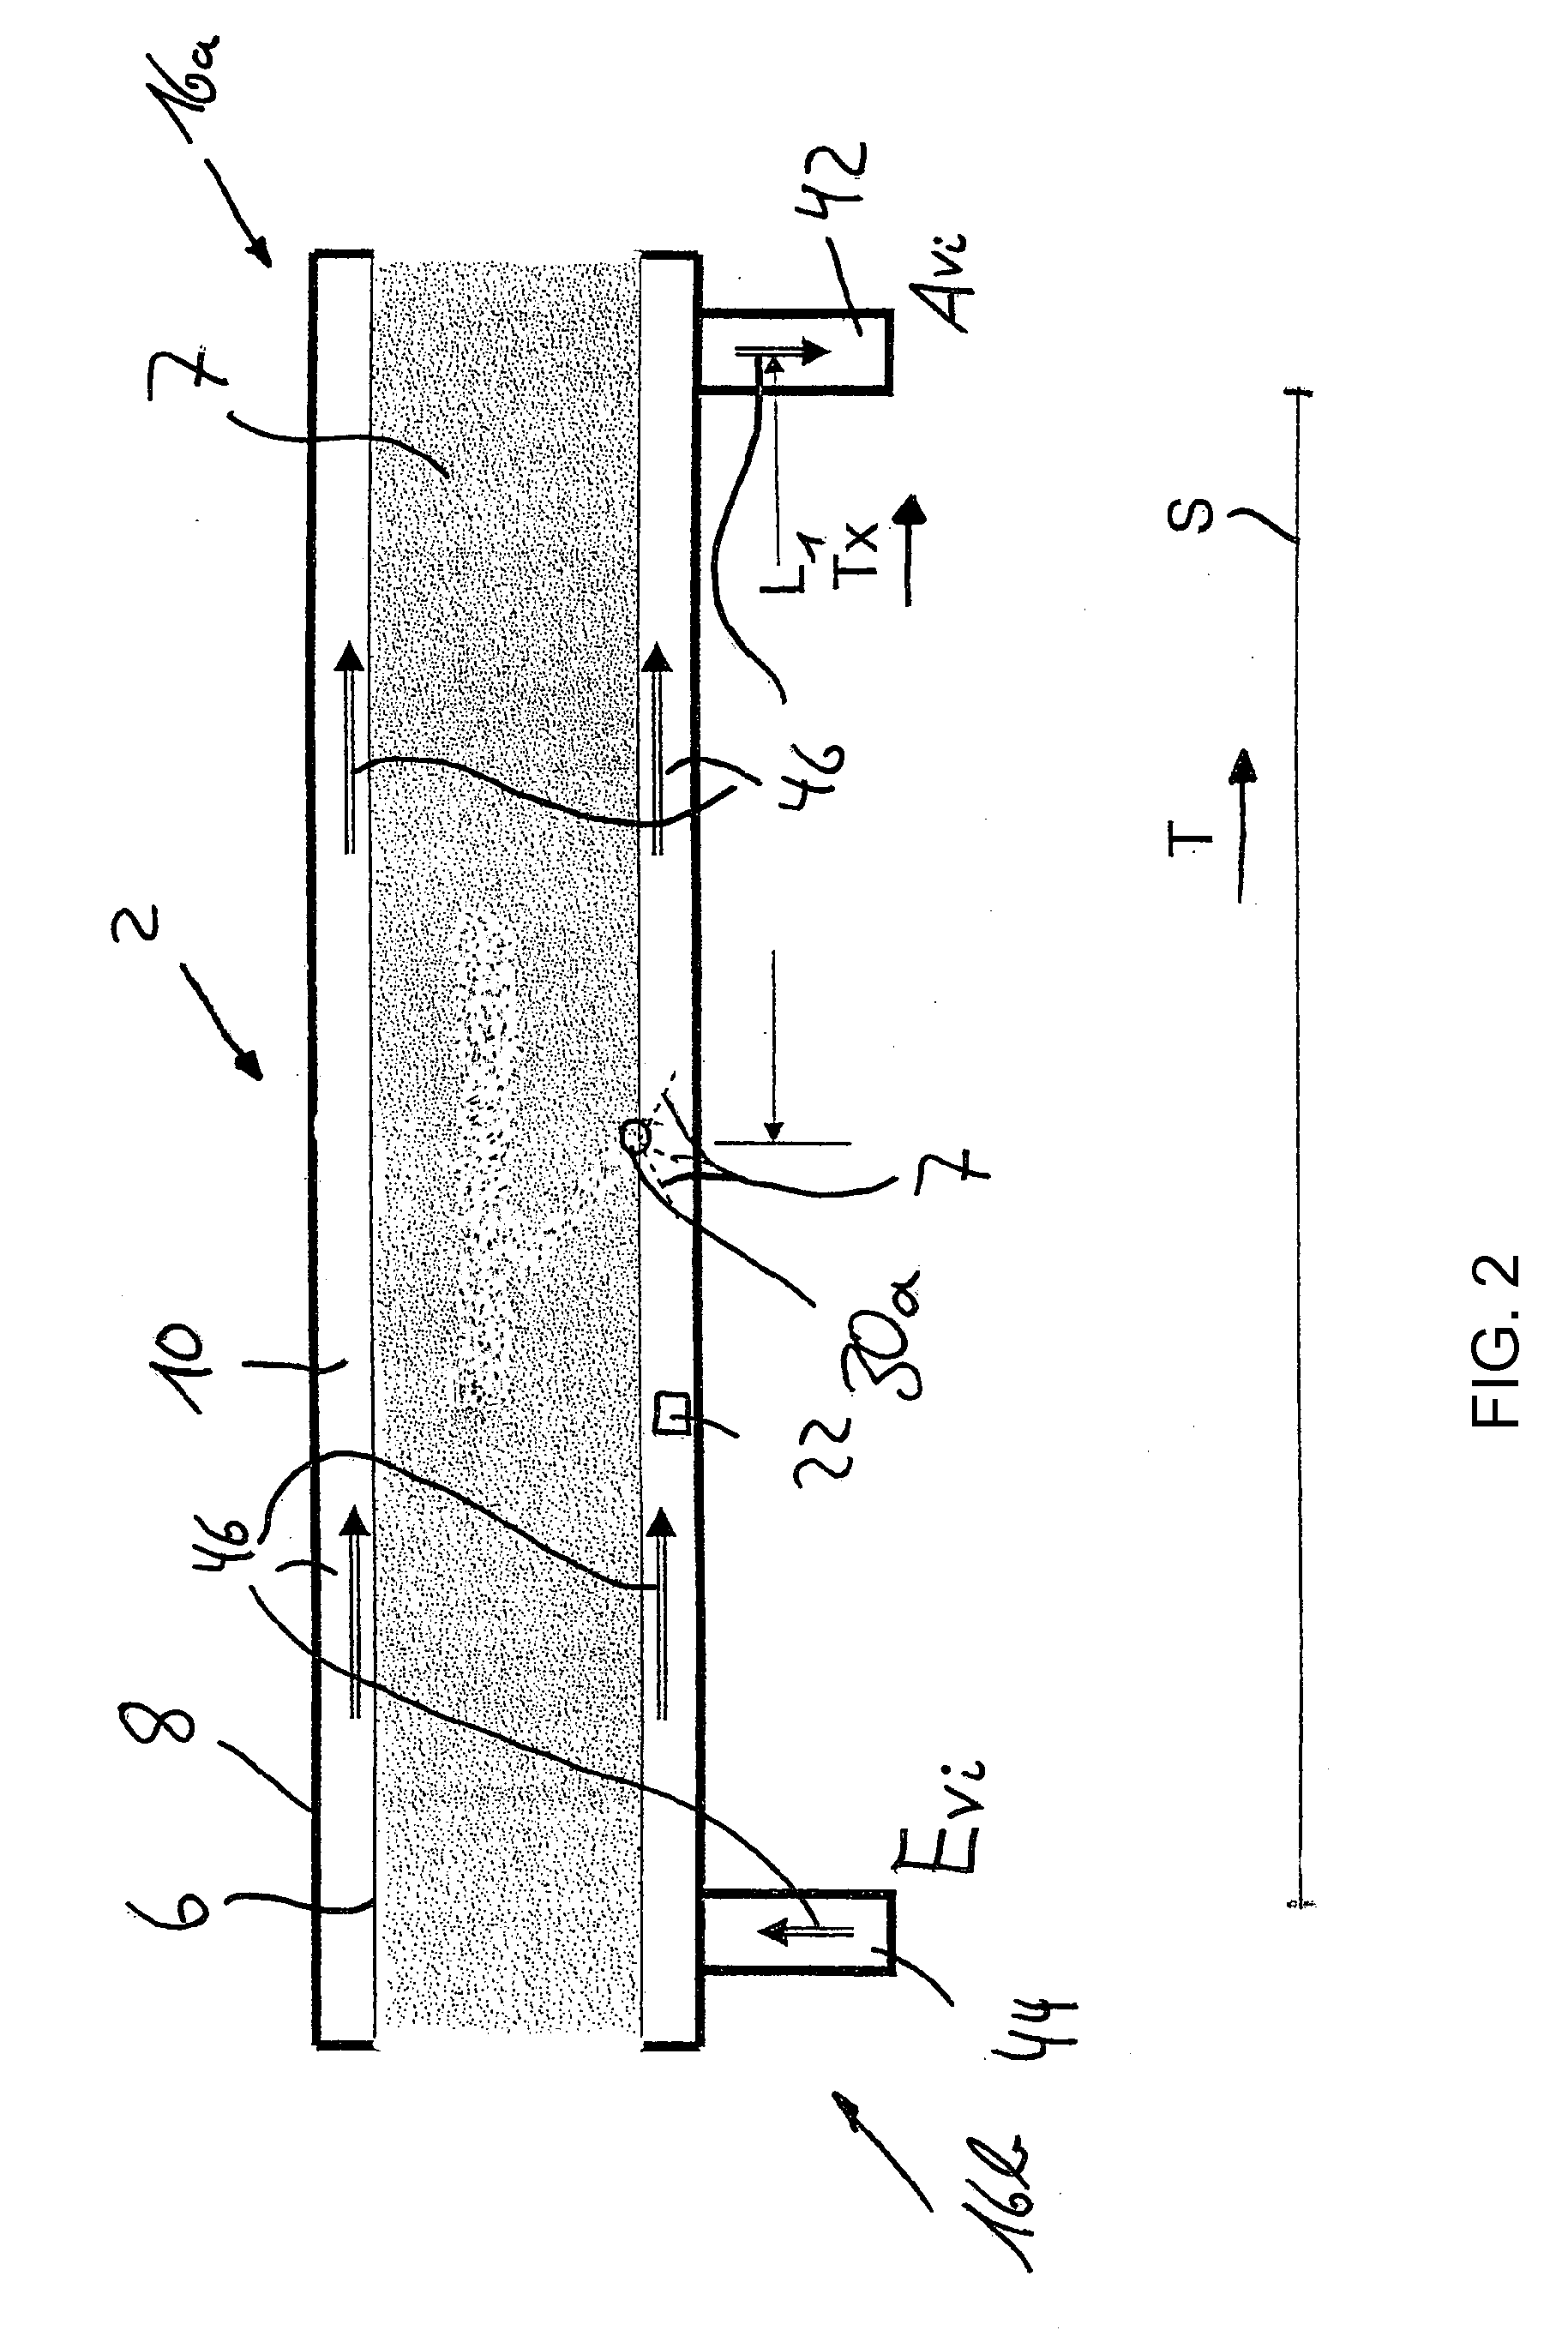 Method and apparatus for detecting a leak in a double pipe